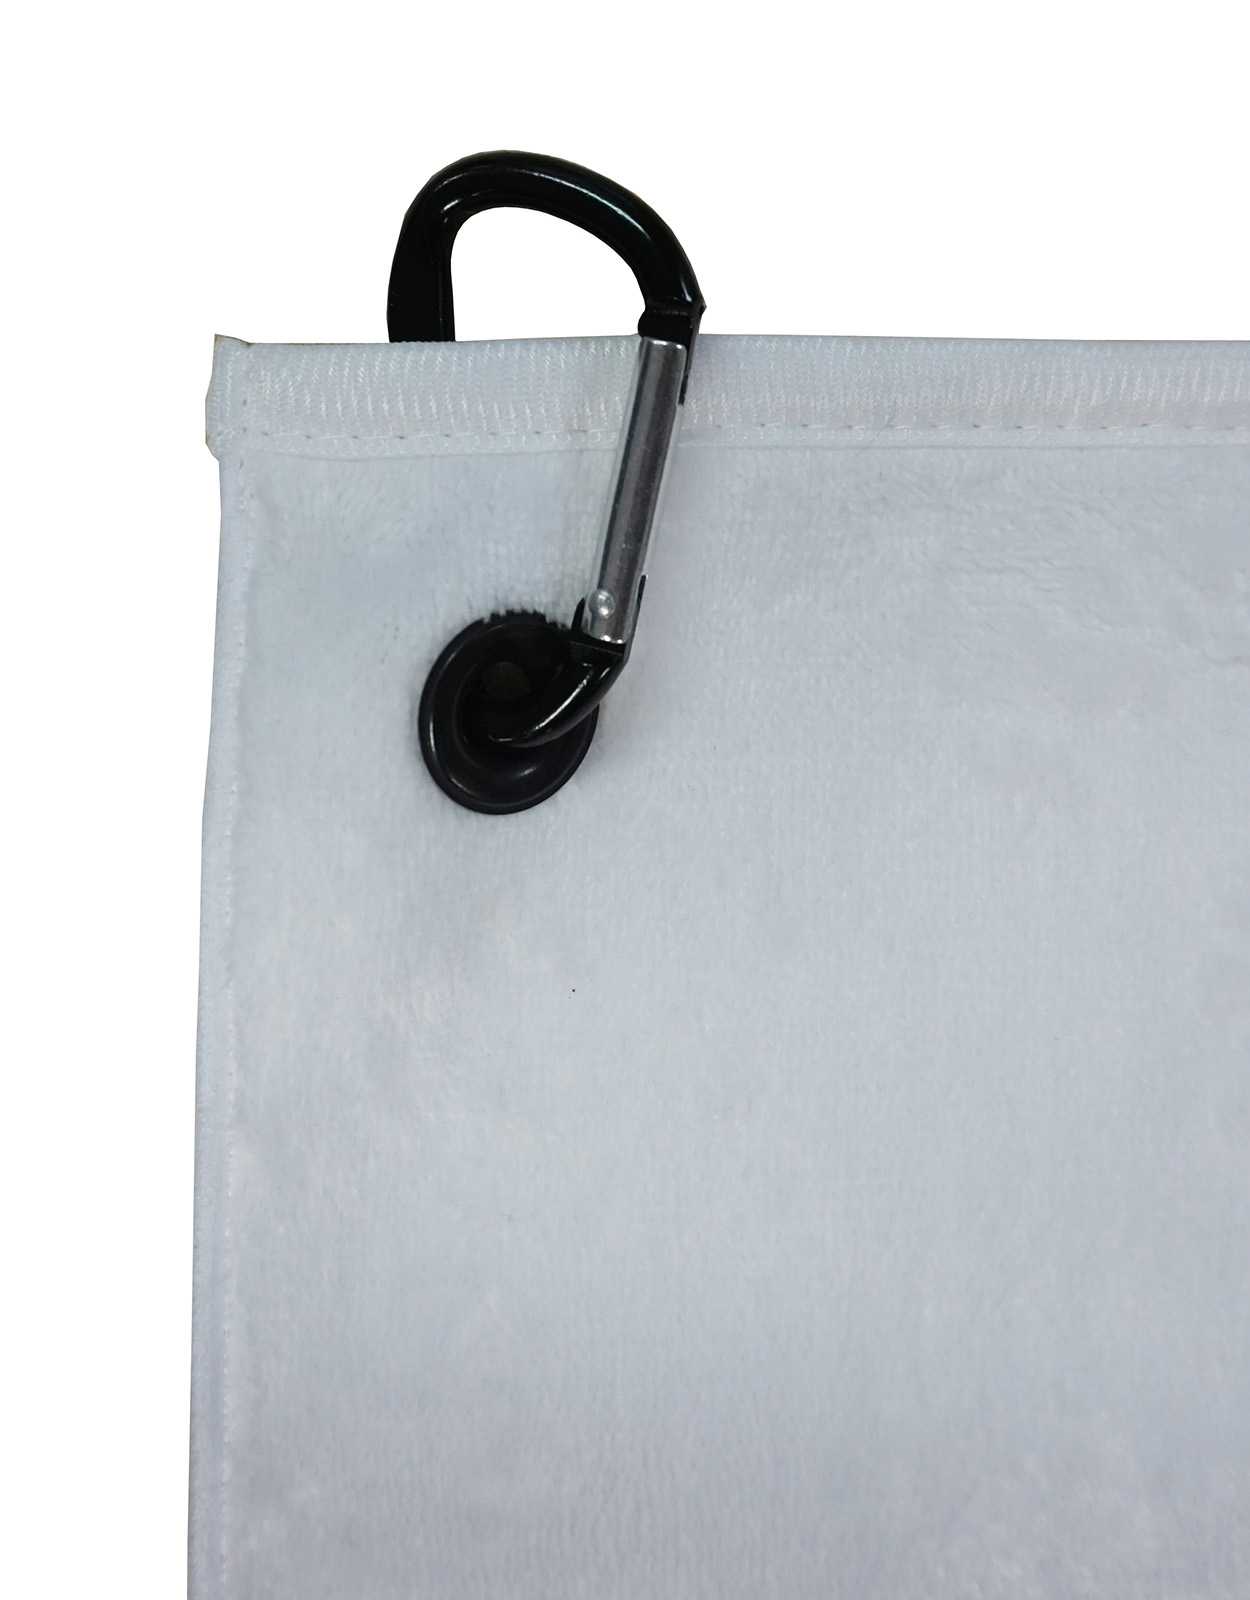 It's All Greek To Me - Classic Saying of Understanding Golf Towel with Carabiner Clip - image 2 of 5